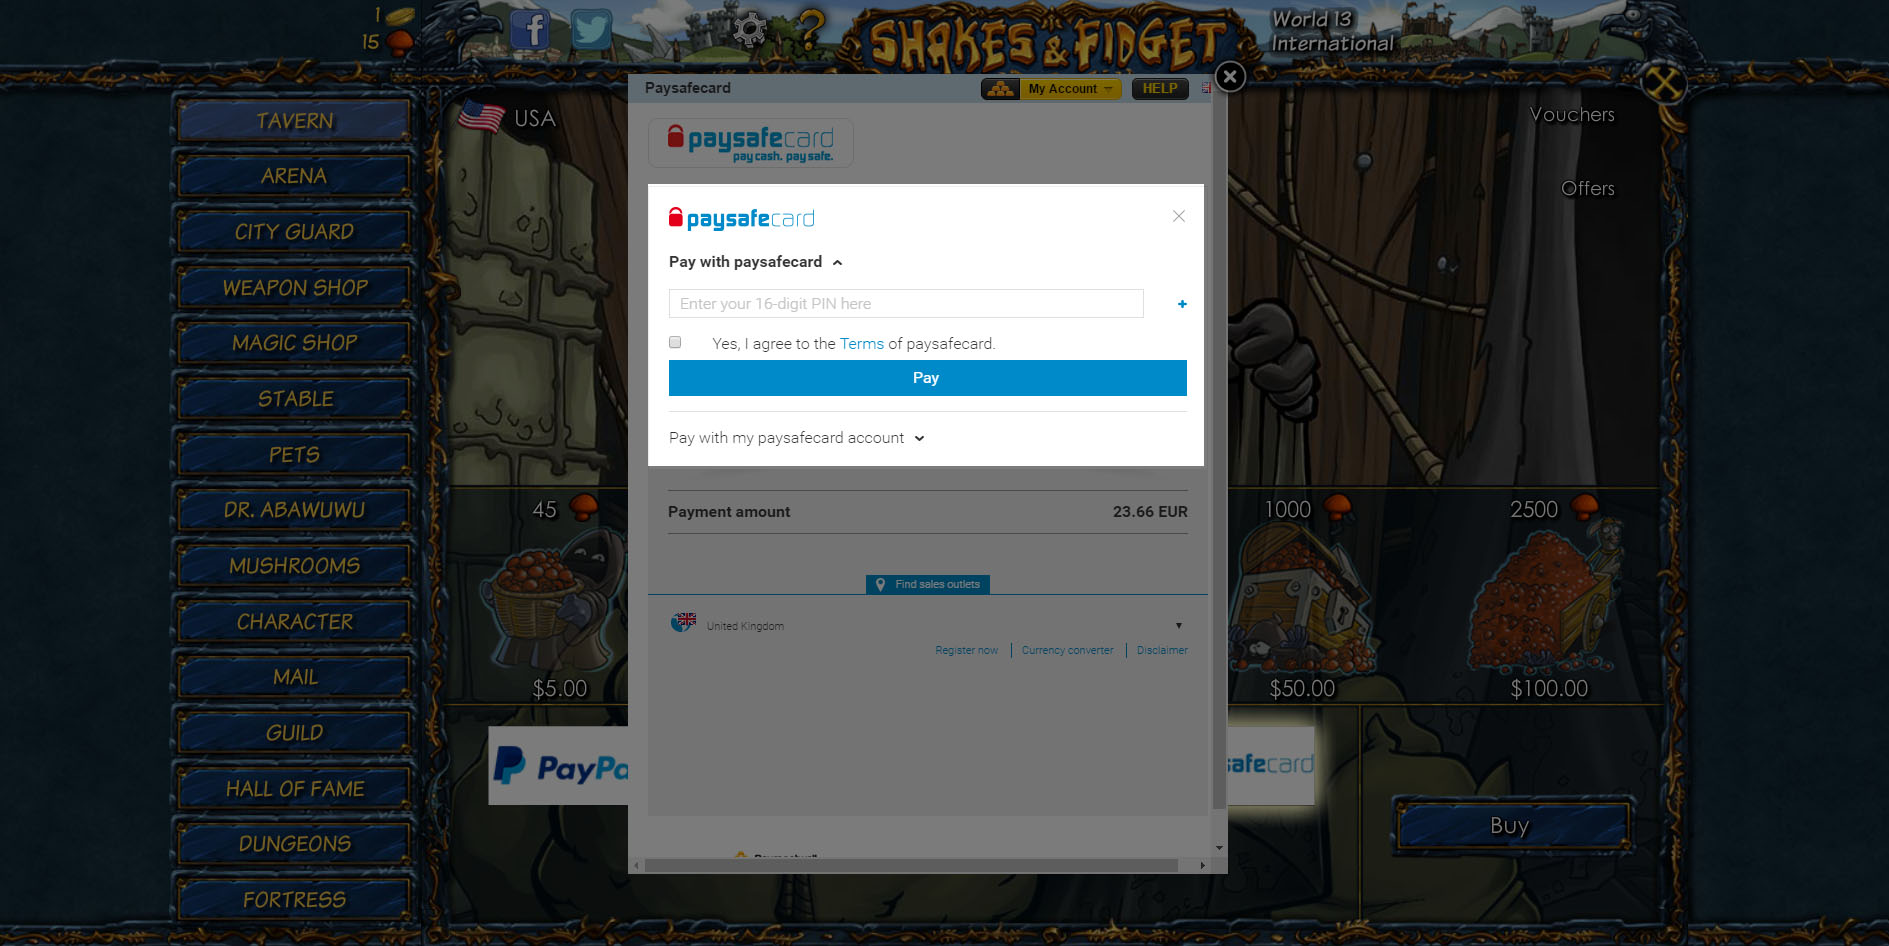 How To Buy Mushrooms In Shakes And Fidget With A Paysafecard